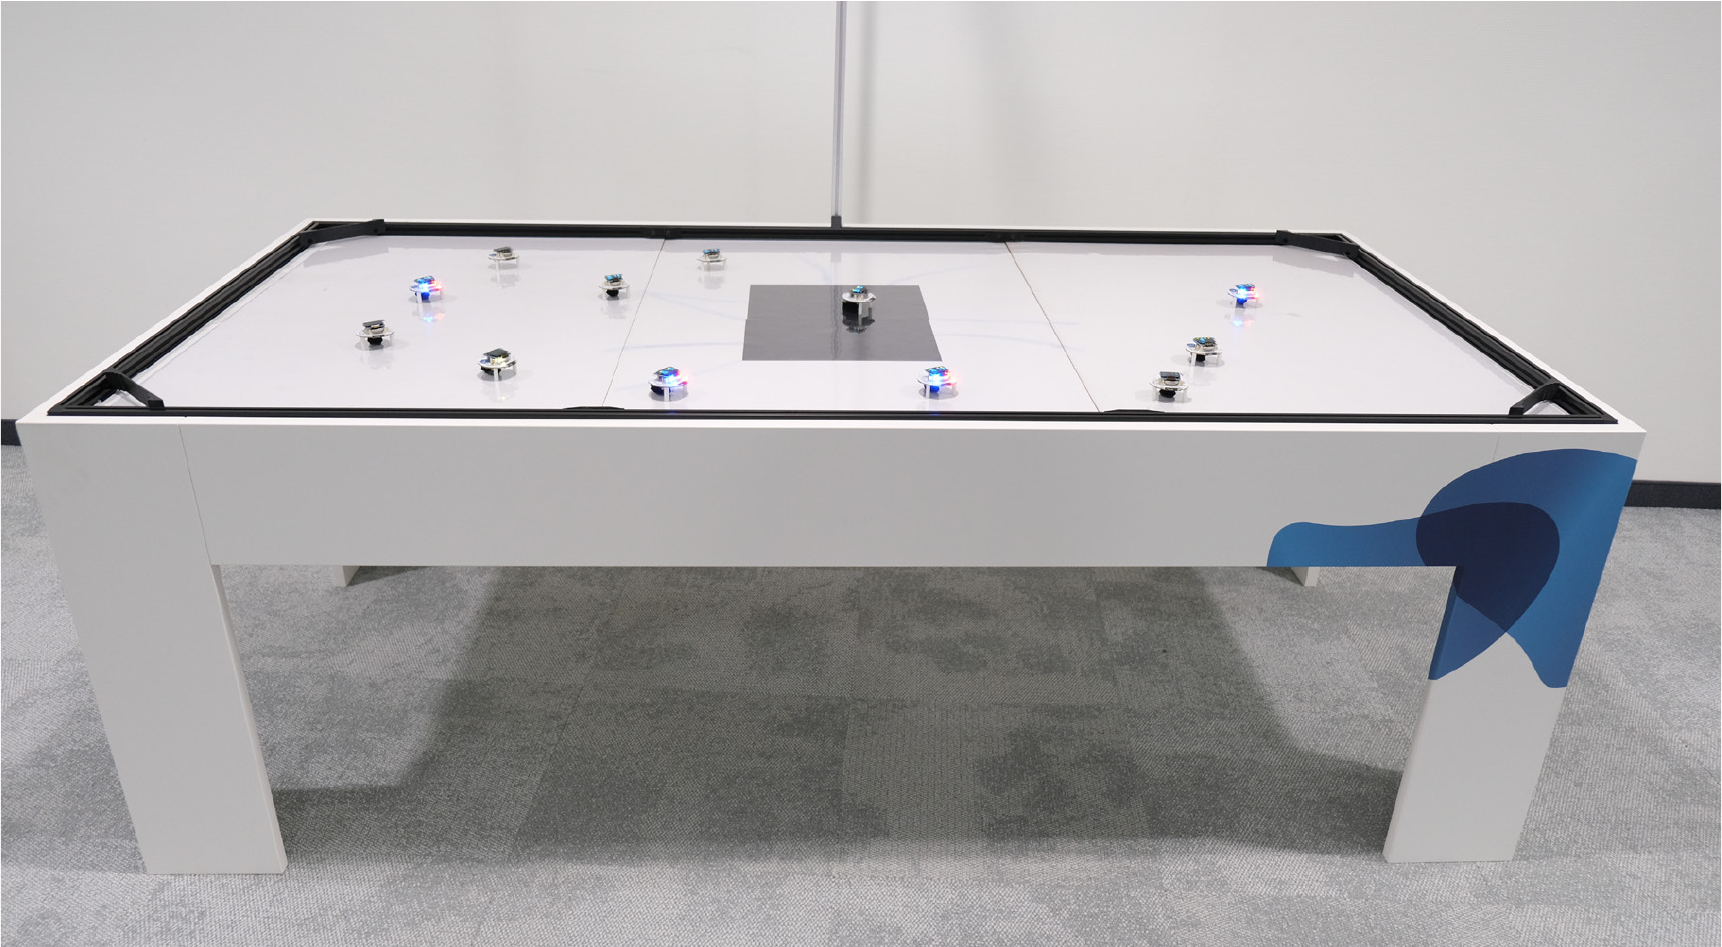 Large framed table that serves as an arena for the Dezibots